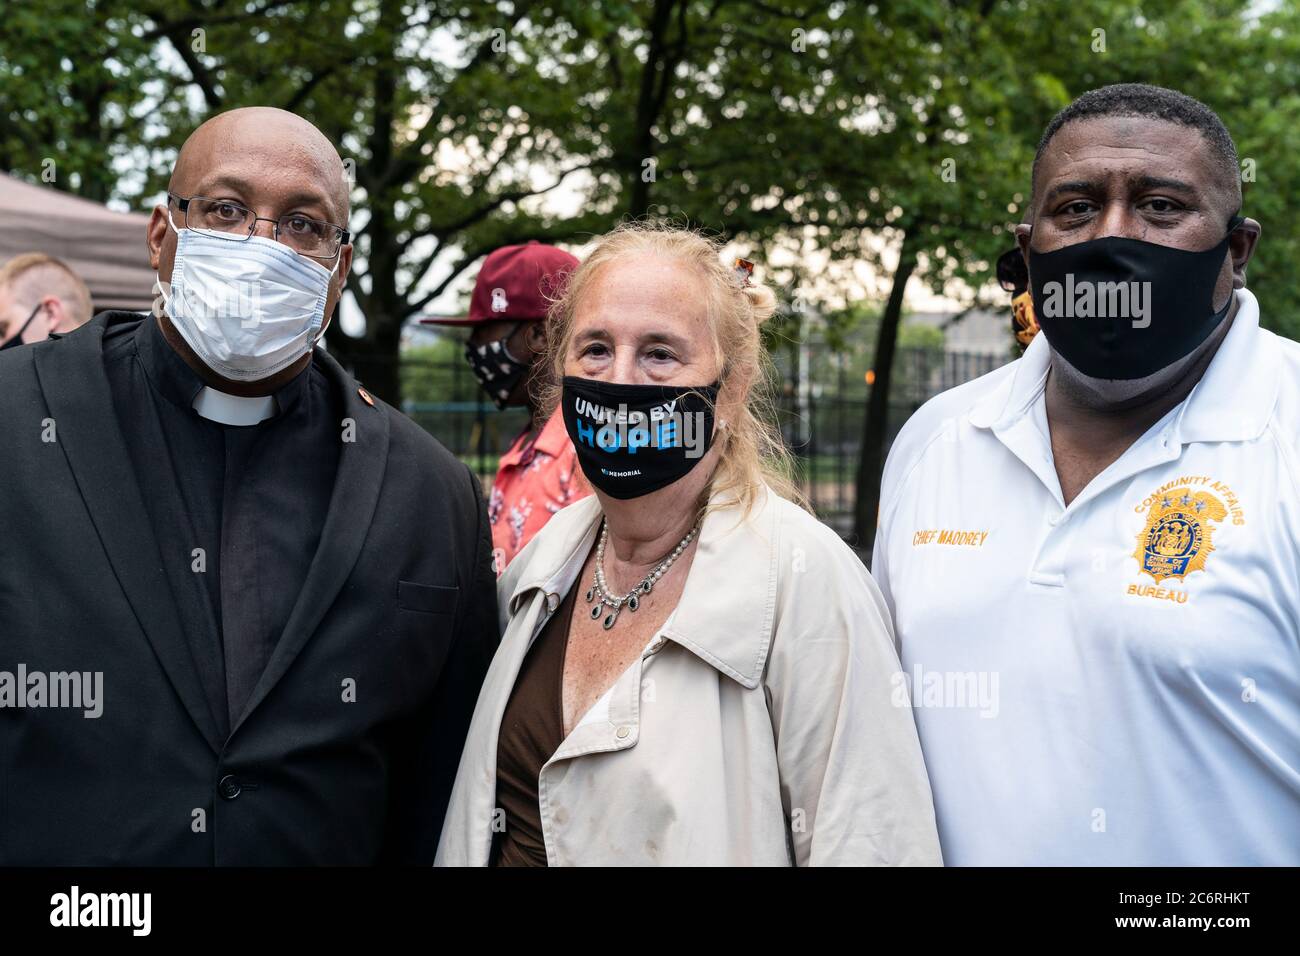 New York, NY - July 11, 2020: Chaplain Robert Rice, Gale Brewer, NYPD Chief Jeffrey Maddrey attend Occupy the Corner rally in East Harlem in response on gun violence Stock Photo